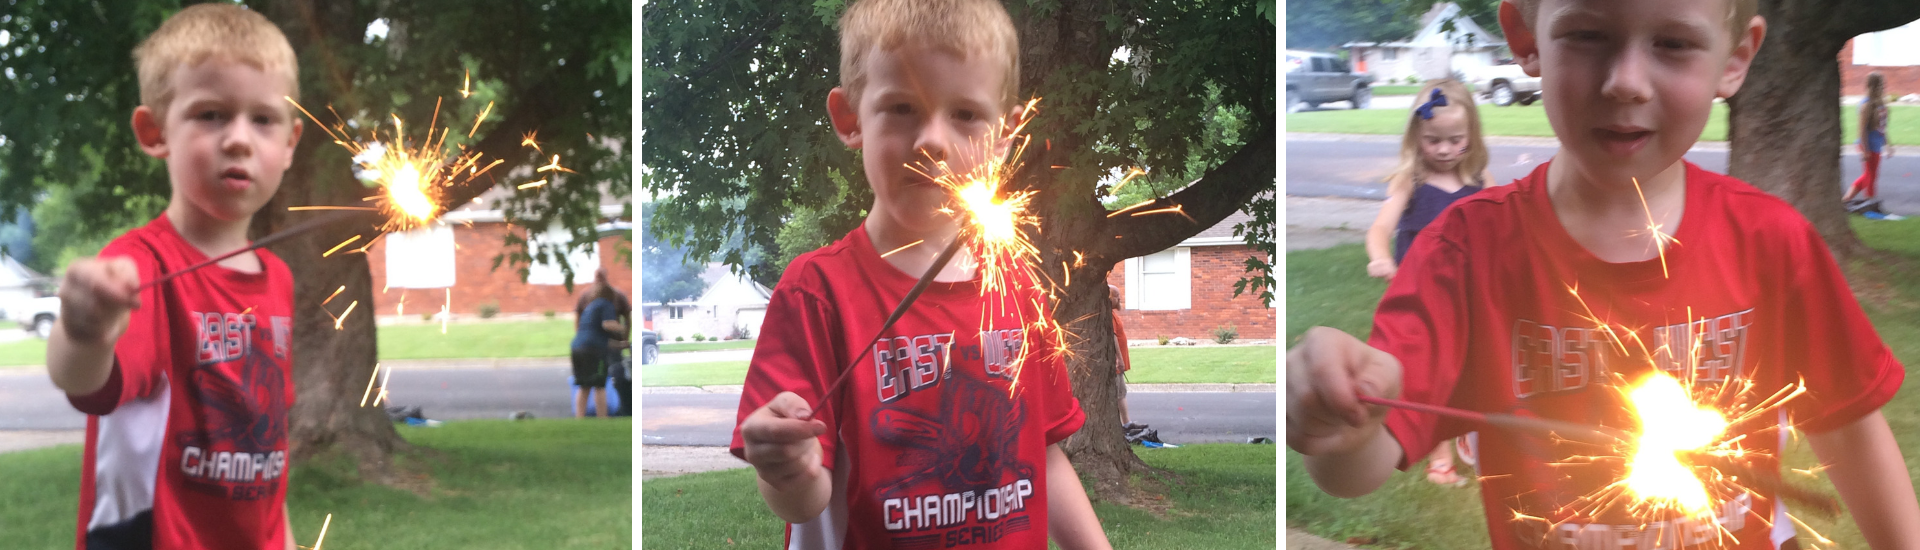 young boy holding sparkler